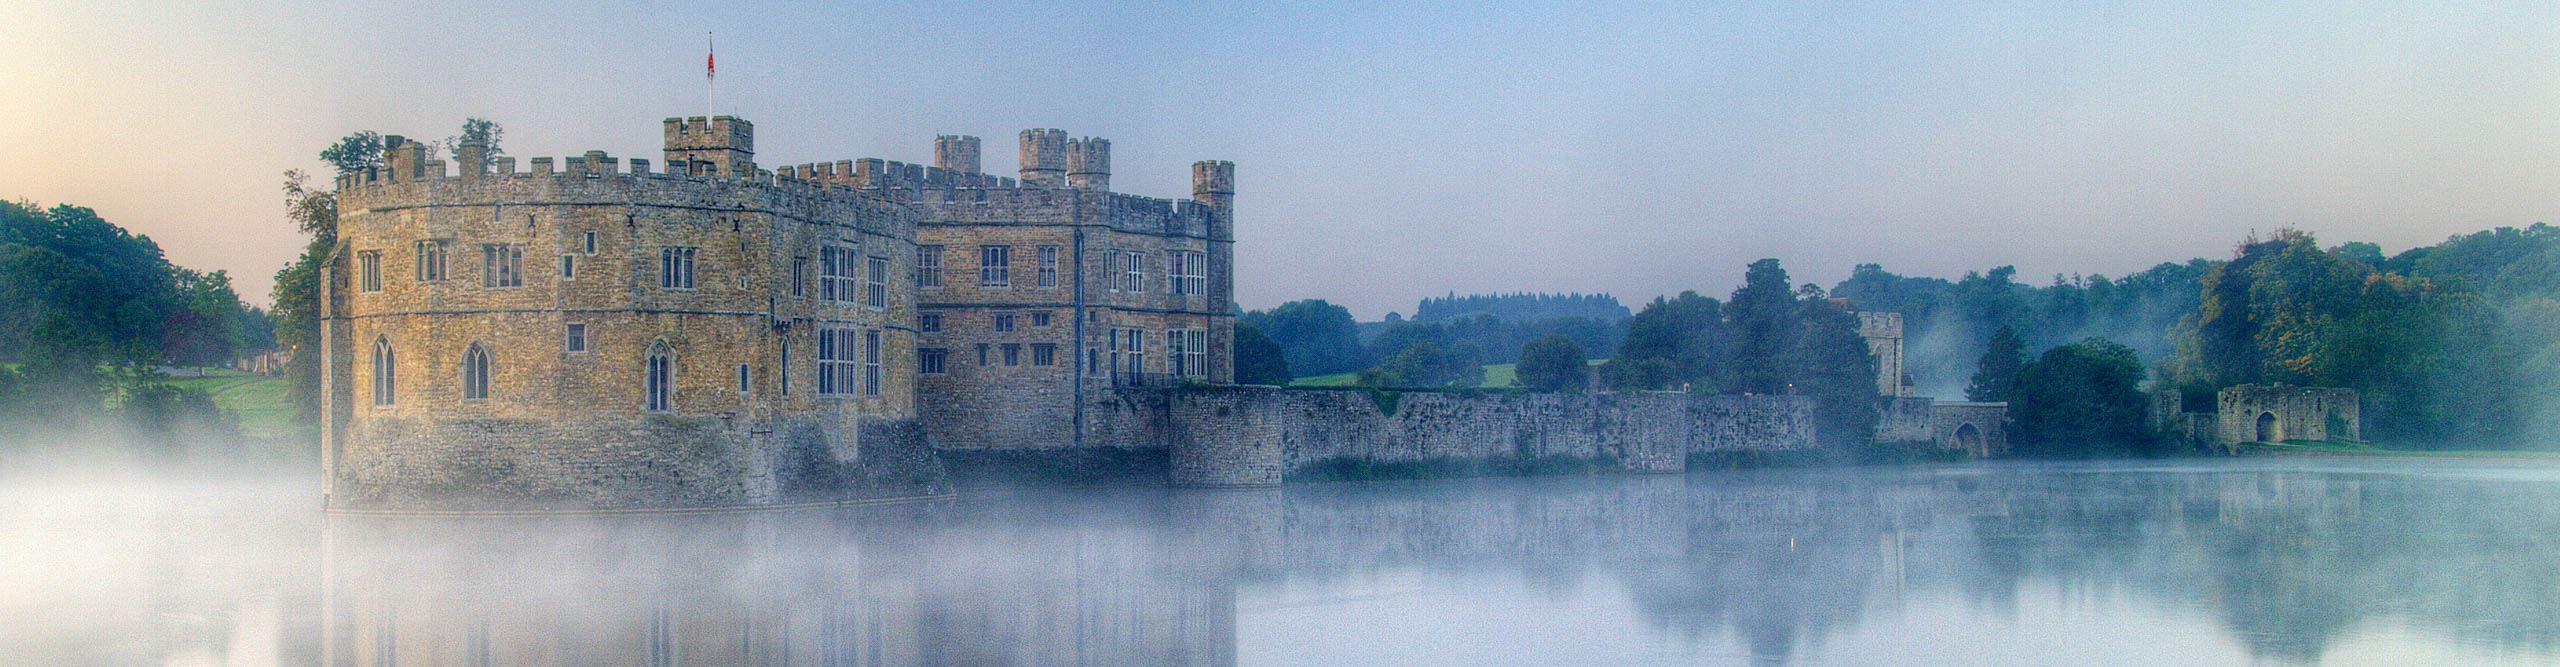 Leeds Castles reflected in the moat, in the morning mist, Kent, UK